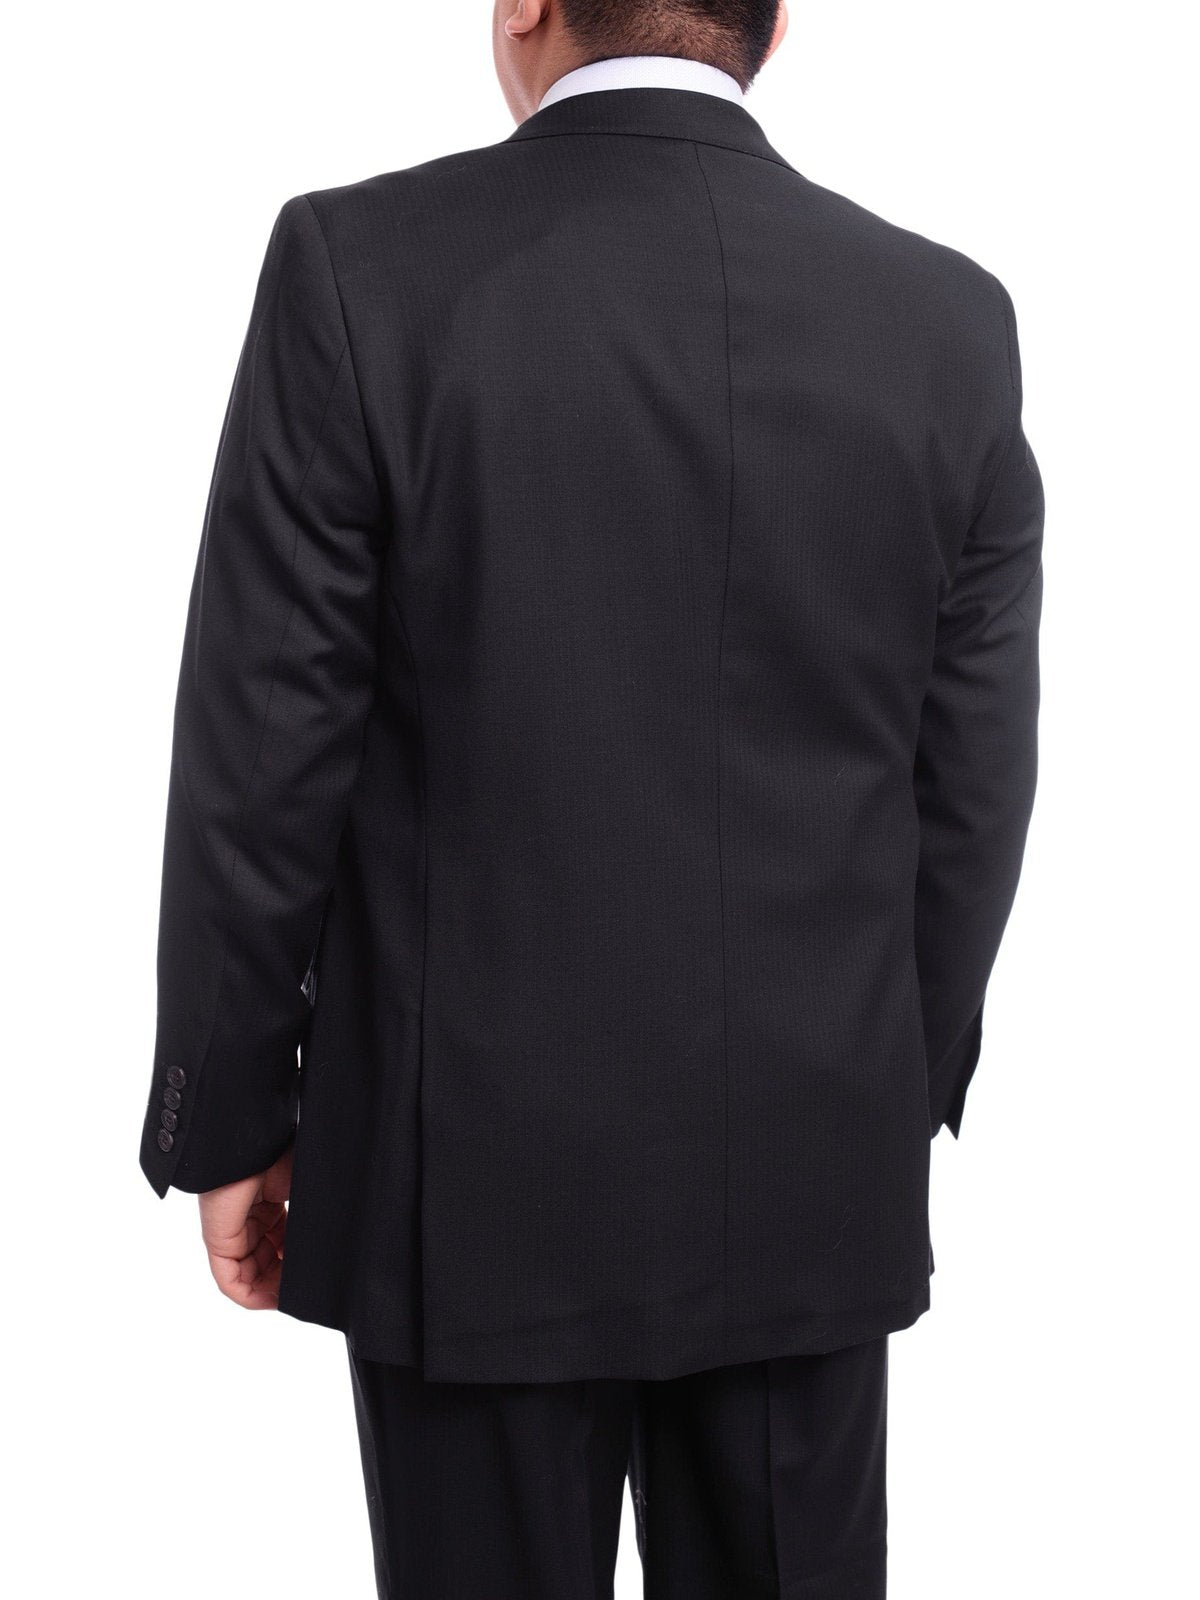 Arthur Black TWO PIECE SUITS Arthur Black Portly Fit Solid Navy Blue Twill Two Button Wool Suit